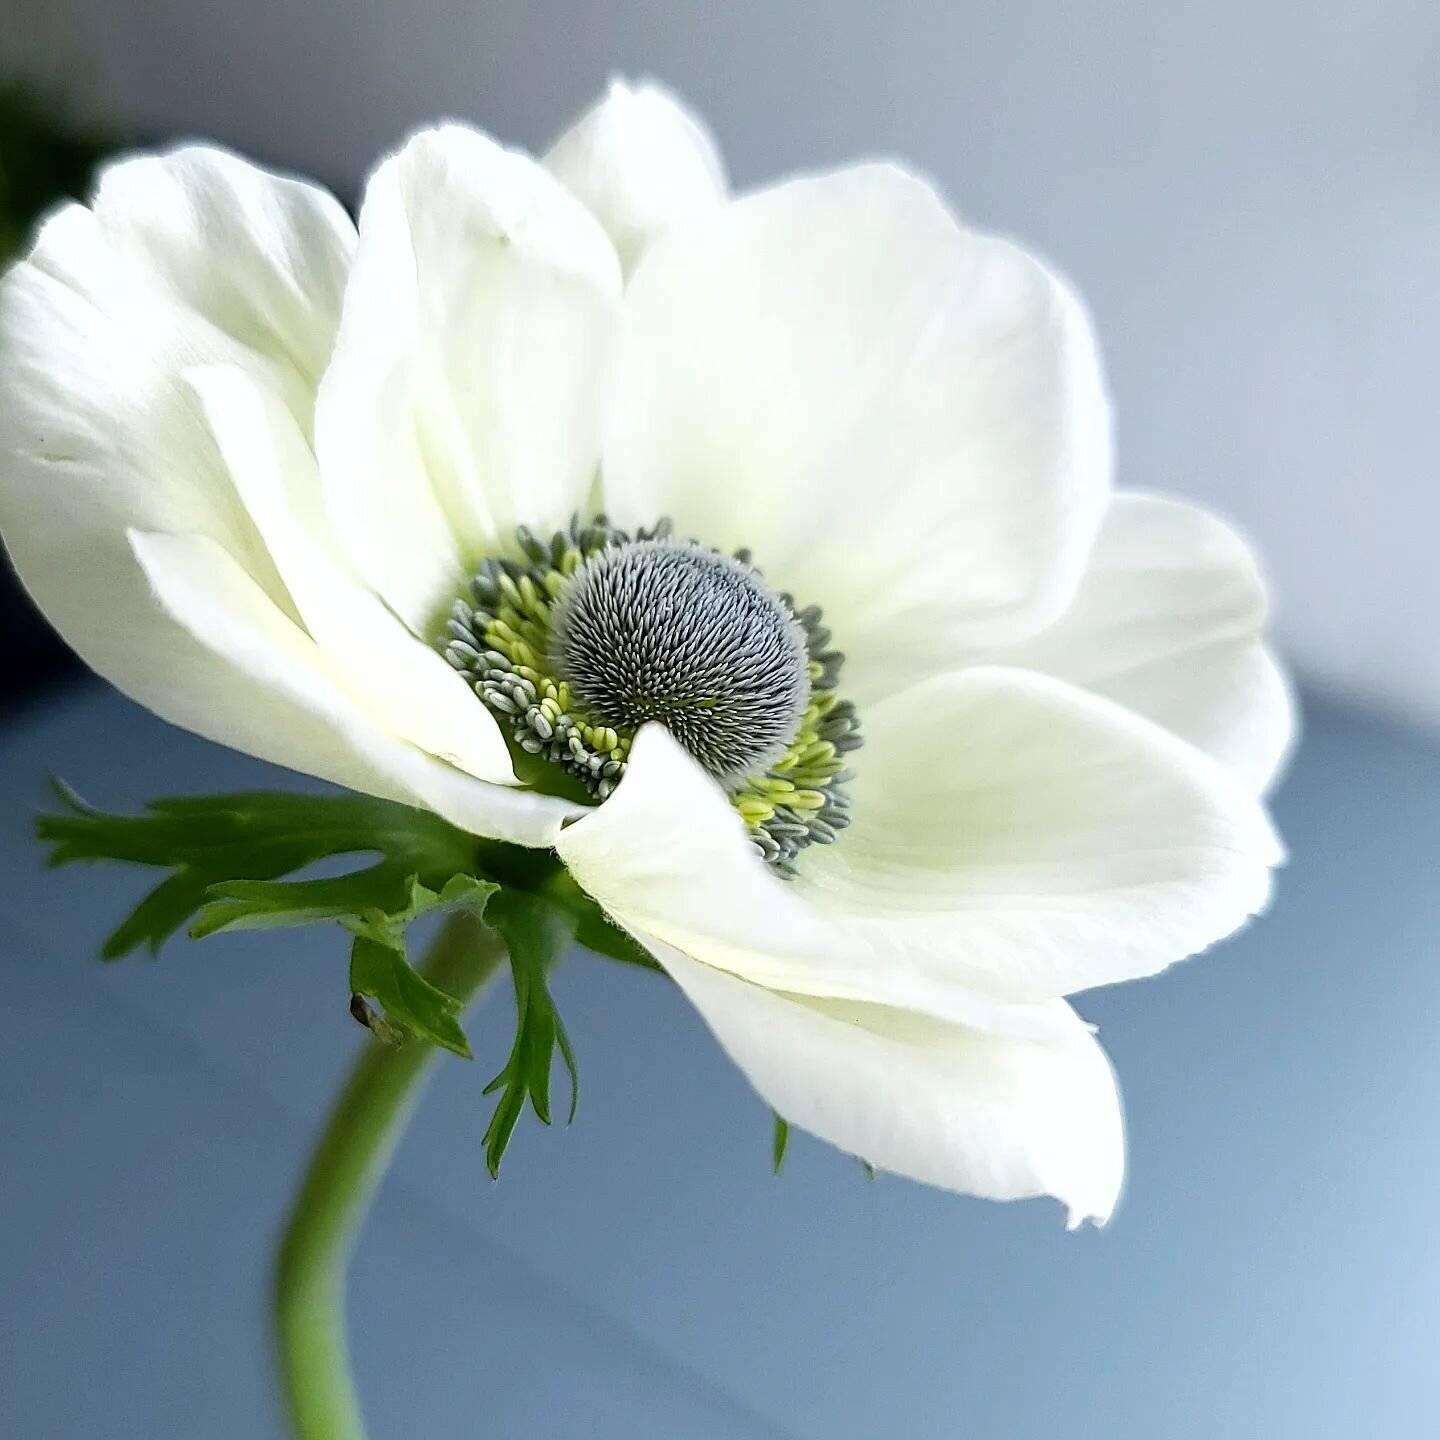 If TODAY&mdash; being the third-ish day of spring 2023 could be summed up in ONE bloom &ndash; it would all come down to this very #Anemone. 

I work with A LOT of really bangin blooms, but to be honest...not many of them strike me quite like literal